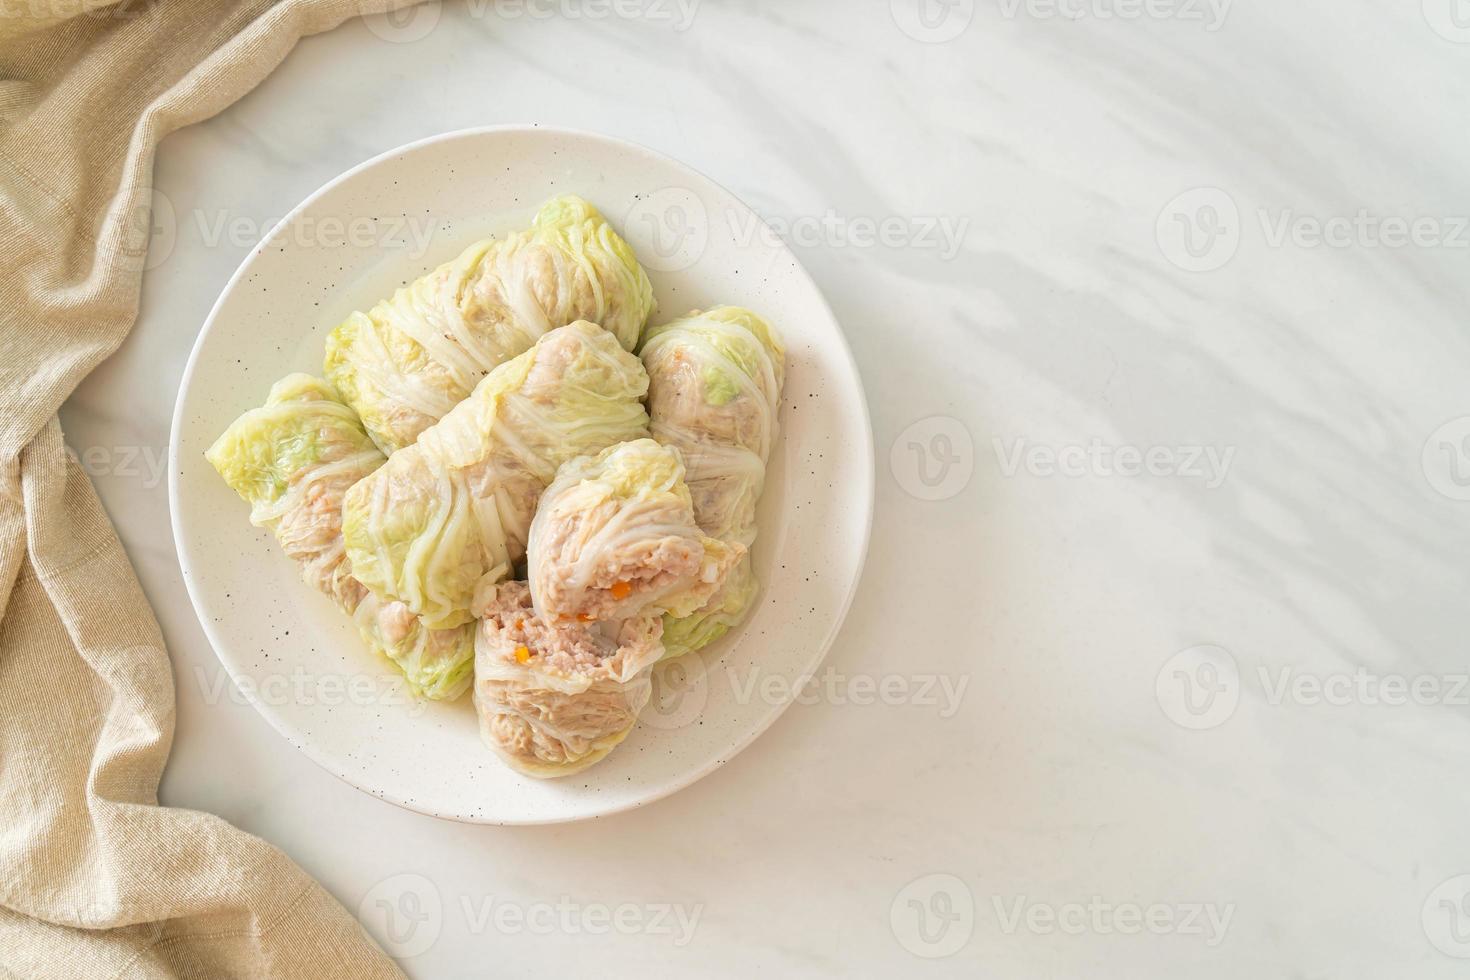 Minced Pork Wrapped in Chinese Cabbage or Steamed Cabbage Stuff Mince Pork photo